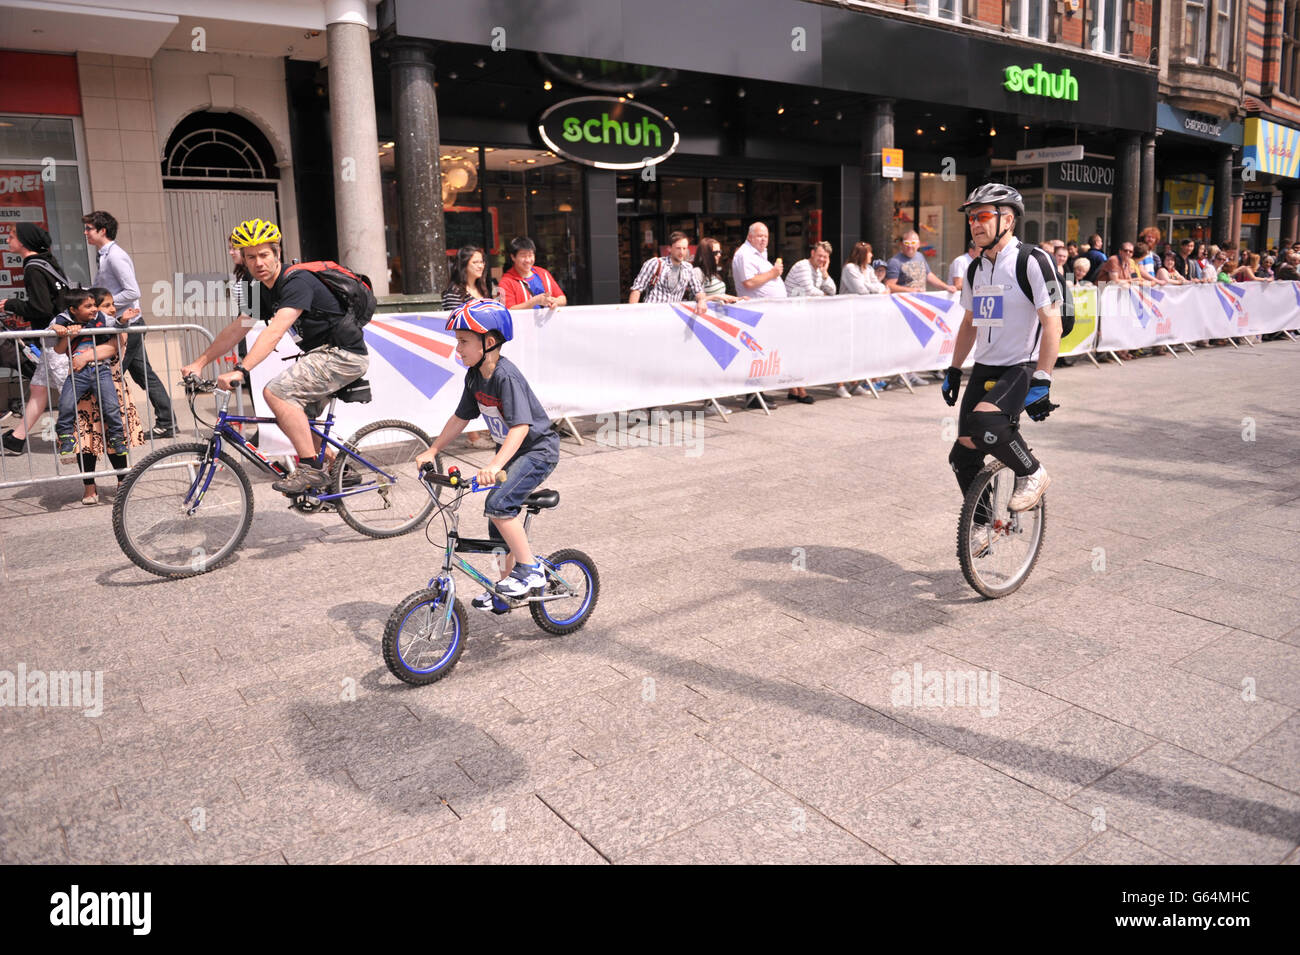 Cycling - 2013 Milk Race - Nottingham. Cyclists participate in the public rides section of The Milk Race around Nottingham city centre. Stock Photo